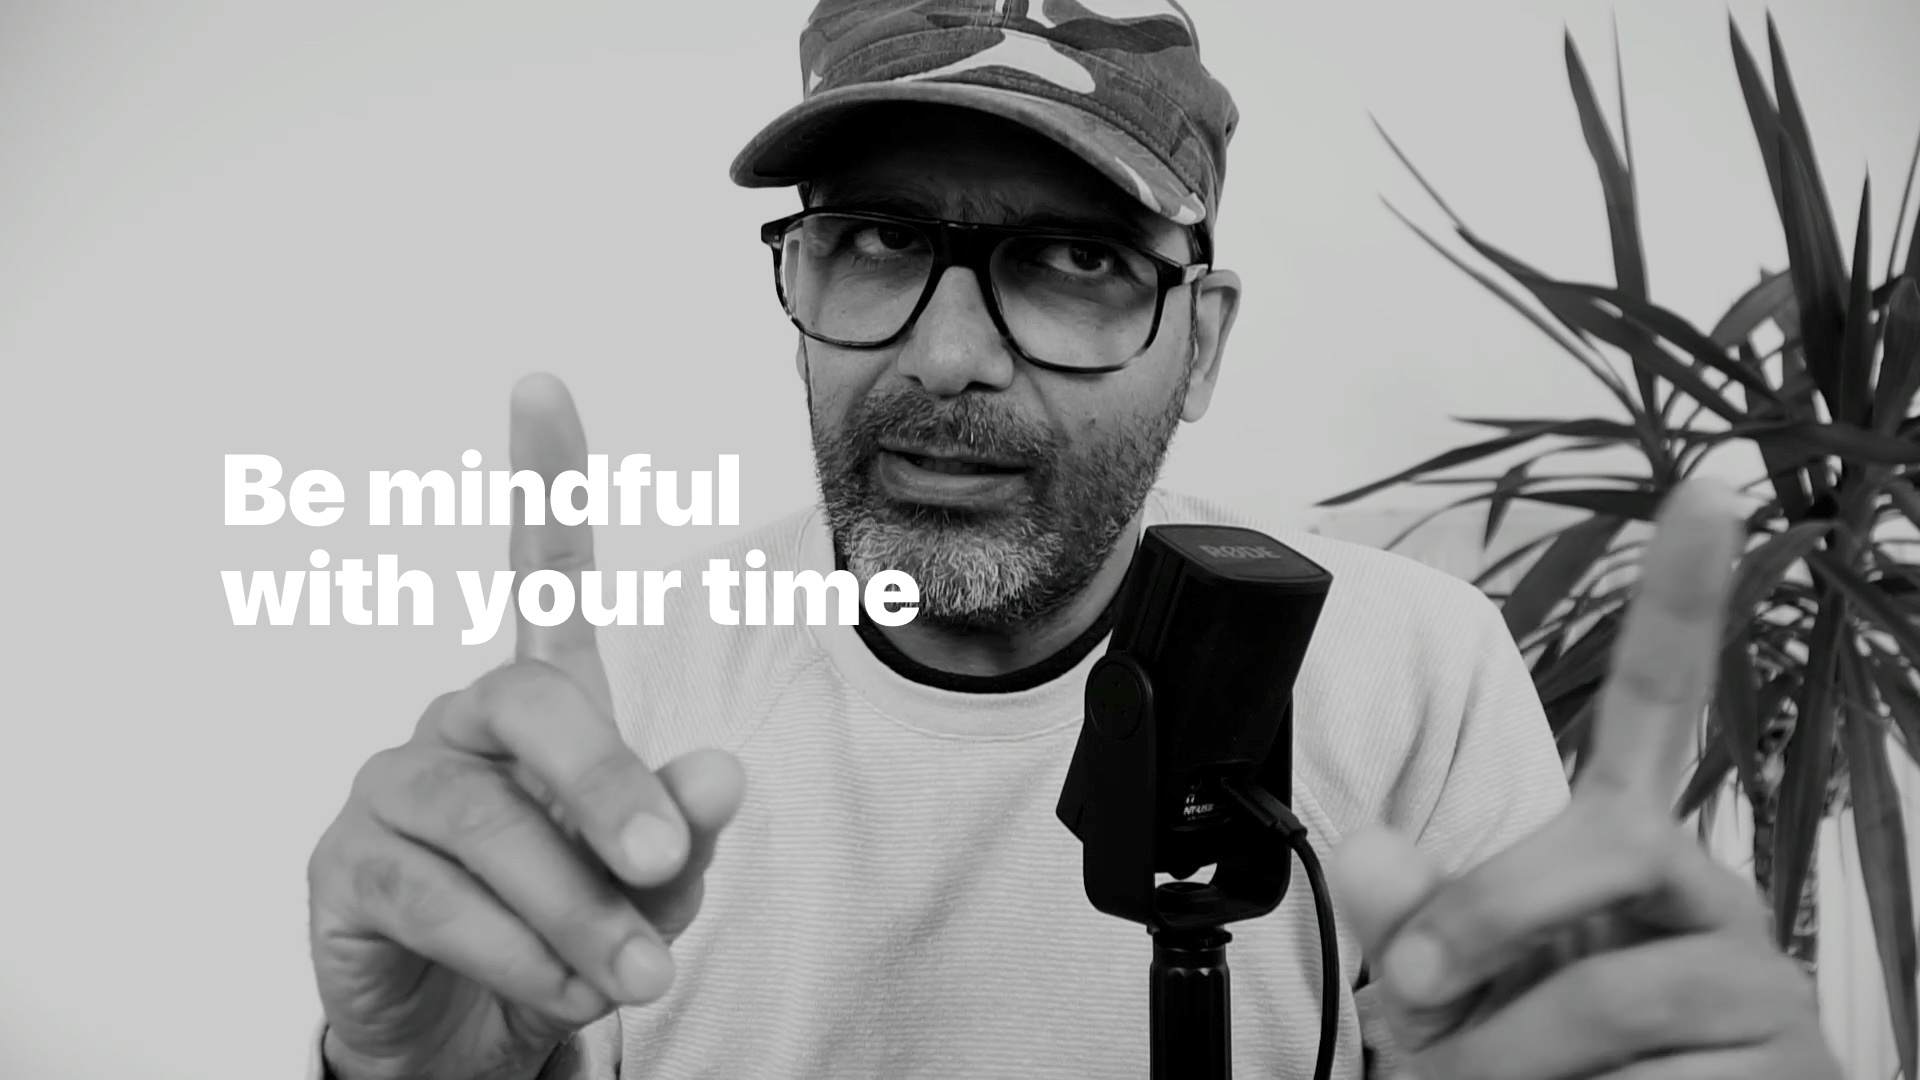 Be mindful with your time